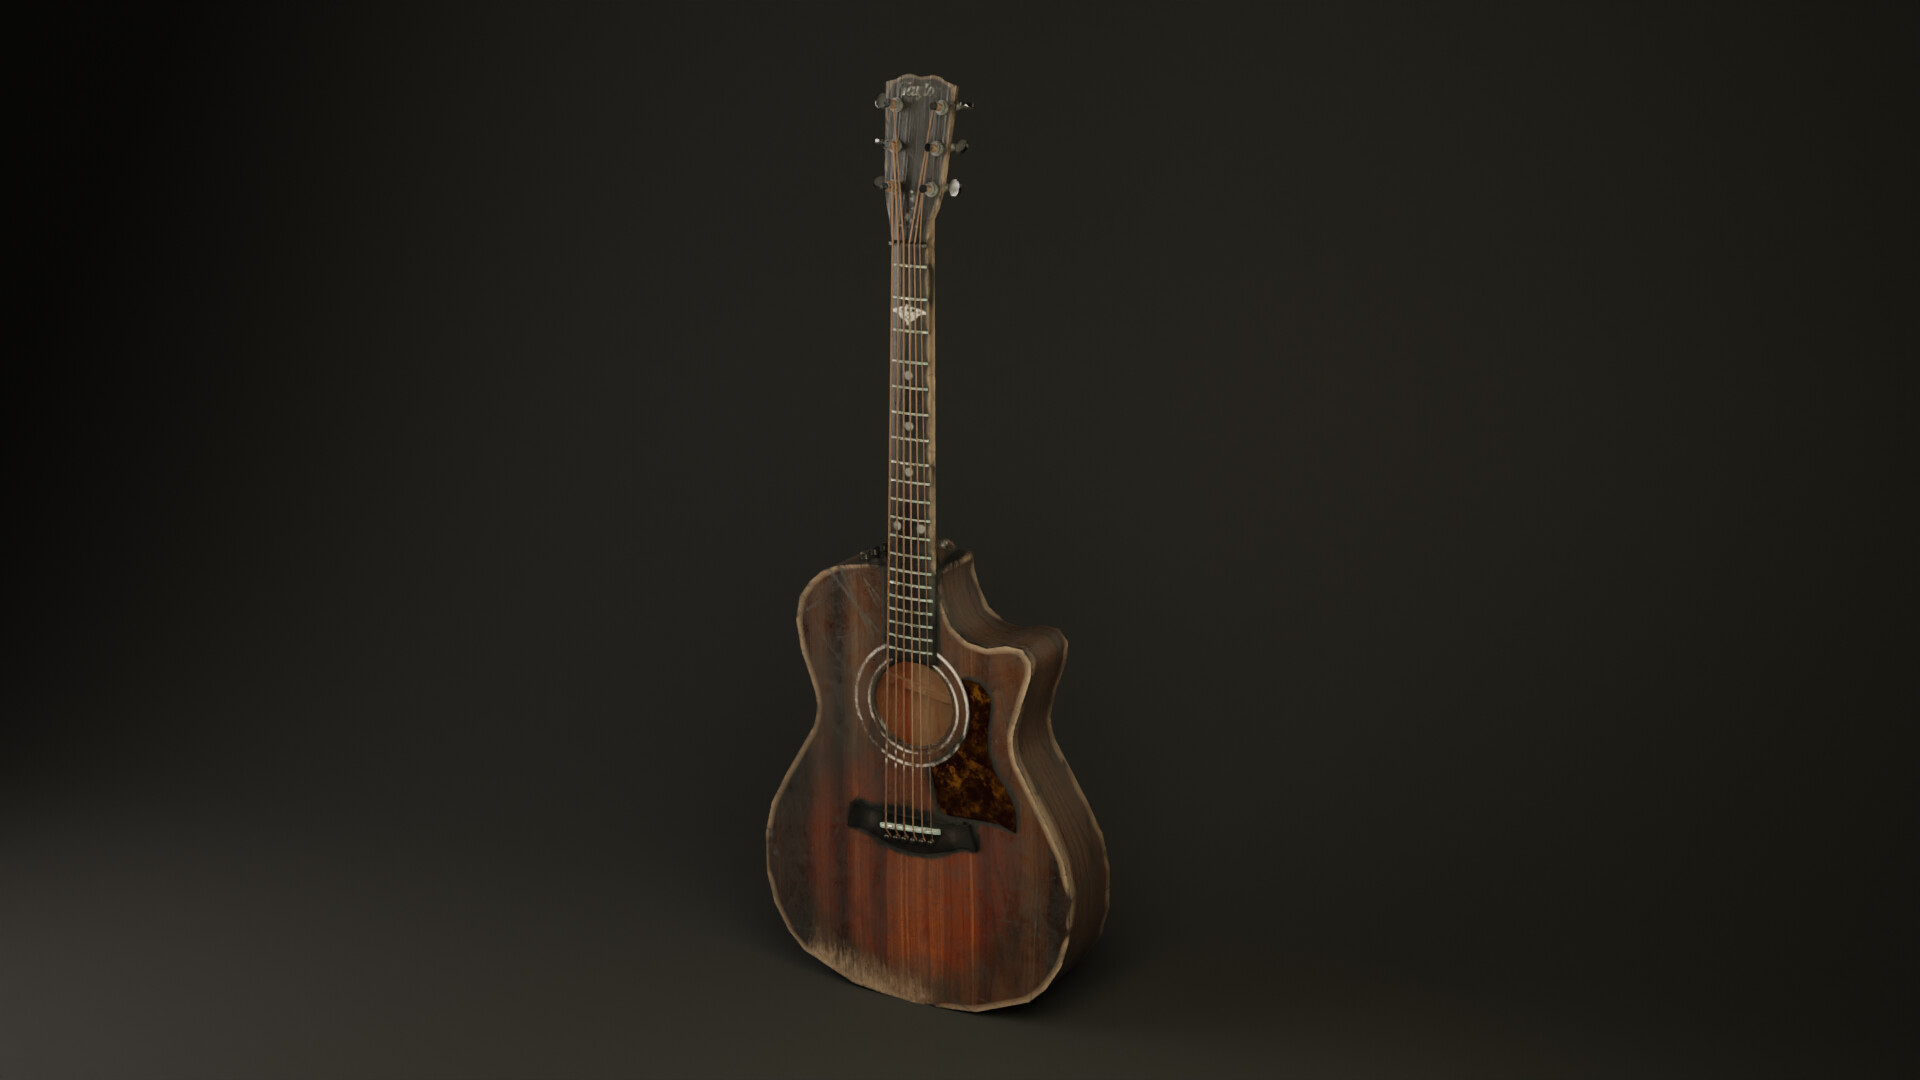 DL005 - The Last of Us Character Ellie with Guitar Statue - STL 3D